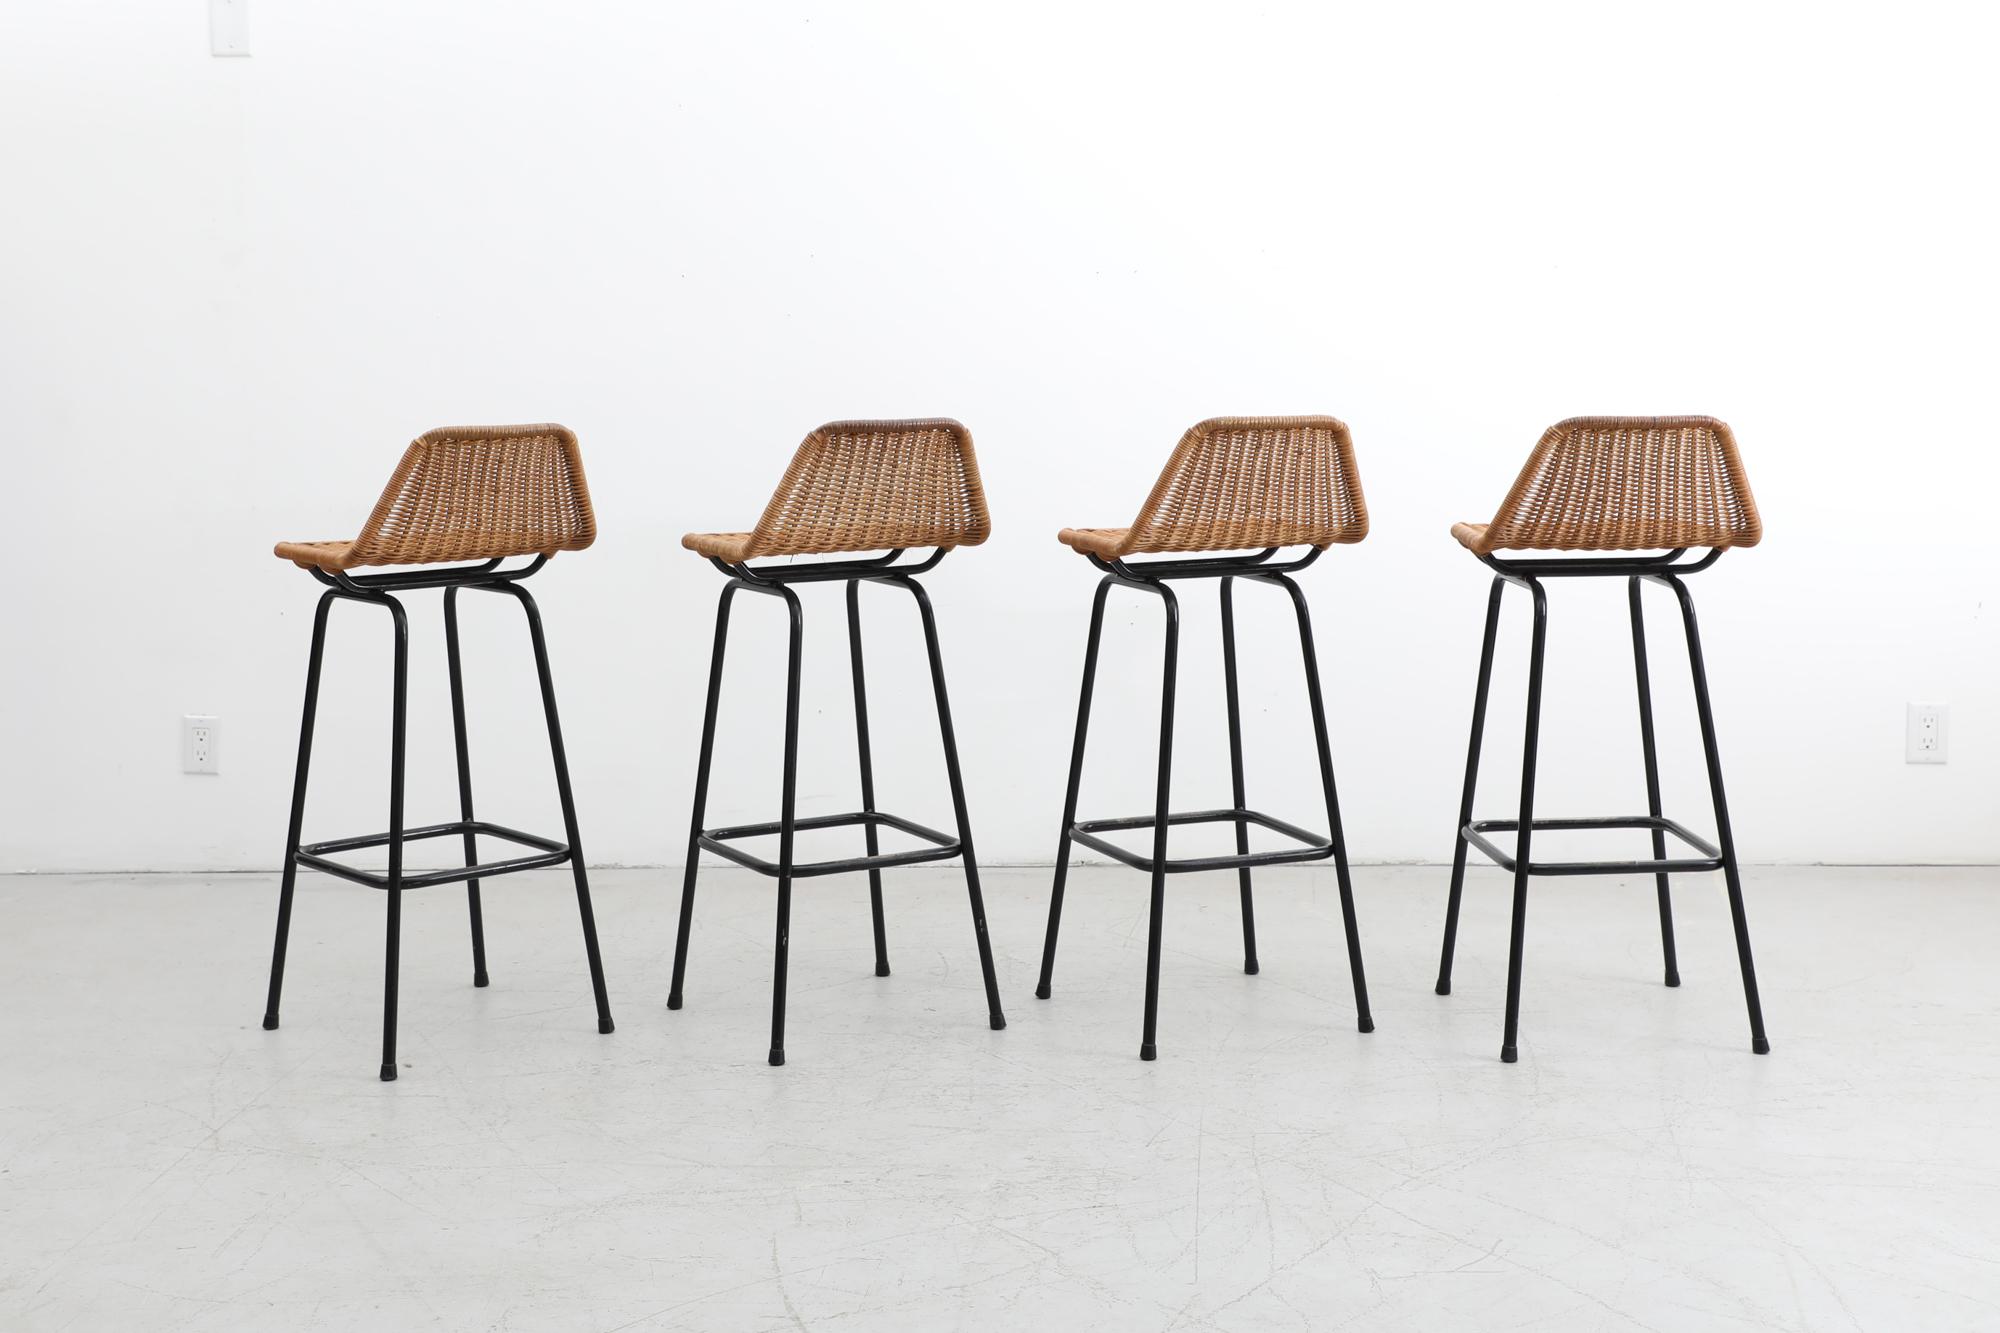 Dutch Set of 4 Charlotte Perriand Style Bar Stools by Dirk van Sliedregt for Rohe Noor